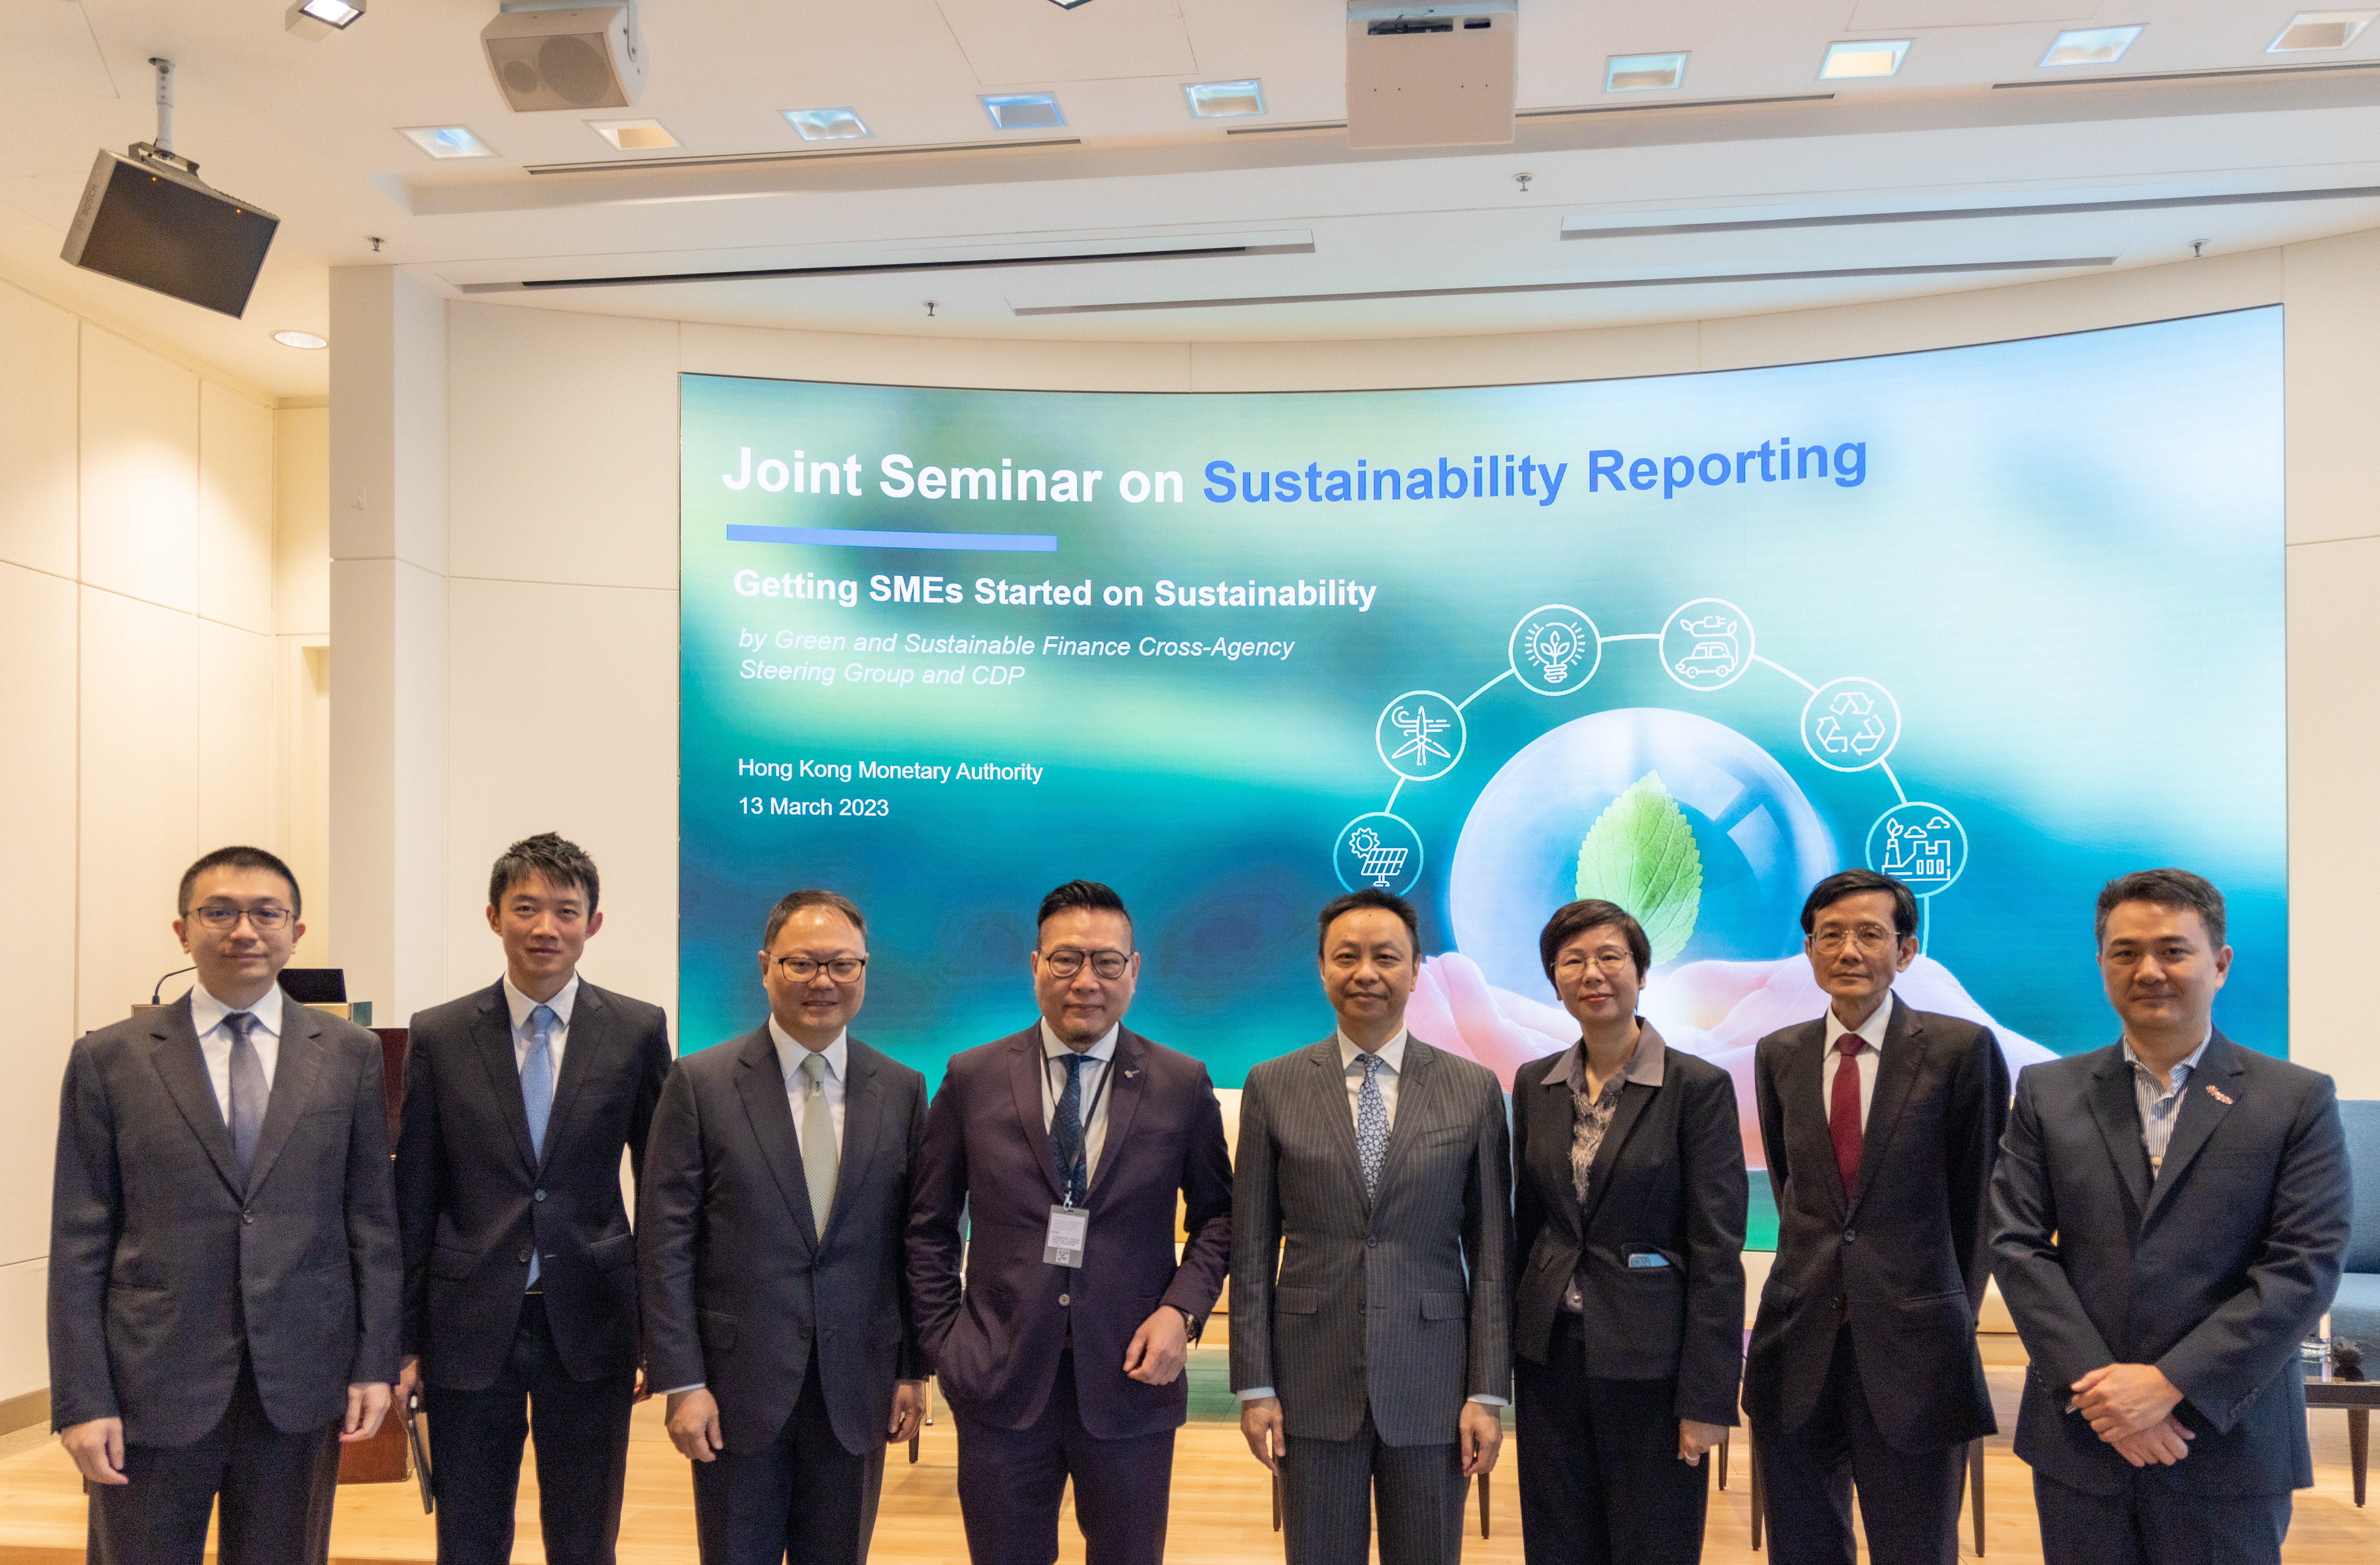 (From left to right) Head of Carbon and ESG Products of the Hong Kong Exchanges and Clearing Limited, Mr Ken Chiu; Head of Market Development Division of the HKMA, Mr Kenneth Hui; CEO of Zurich Insurance Company Limited and Chairman of Task Force on Green Insurance of the Hong Kong Federation of Insurers, Mr Eric Hui; President of the Chinese Manufacturers' Association of Hong Kong, Dr Allen Shi;  Deputy Chief Executive of the HKMA, Mr Darryl Chan; Managing Director, Head of Risk Management of Citibank Hong Kong Limited, Ms Cindy Pau; Chief Financial Officer of HK Electric Investments, Mr Kim Man Wong; and Managing Director, Asia Pacific of CDP, Mr Donald Chan are pictured at seminar on sustainability reporting jointly organised by the Steering Group and CDP on 13 March.